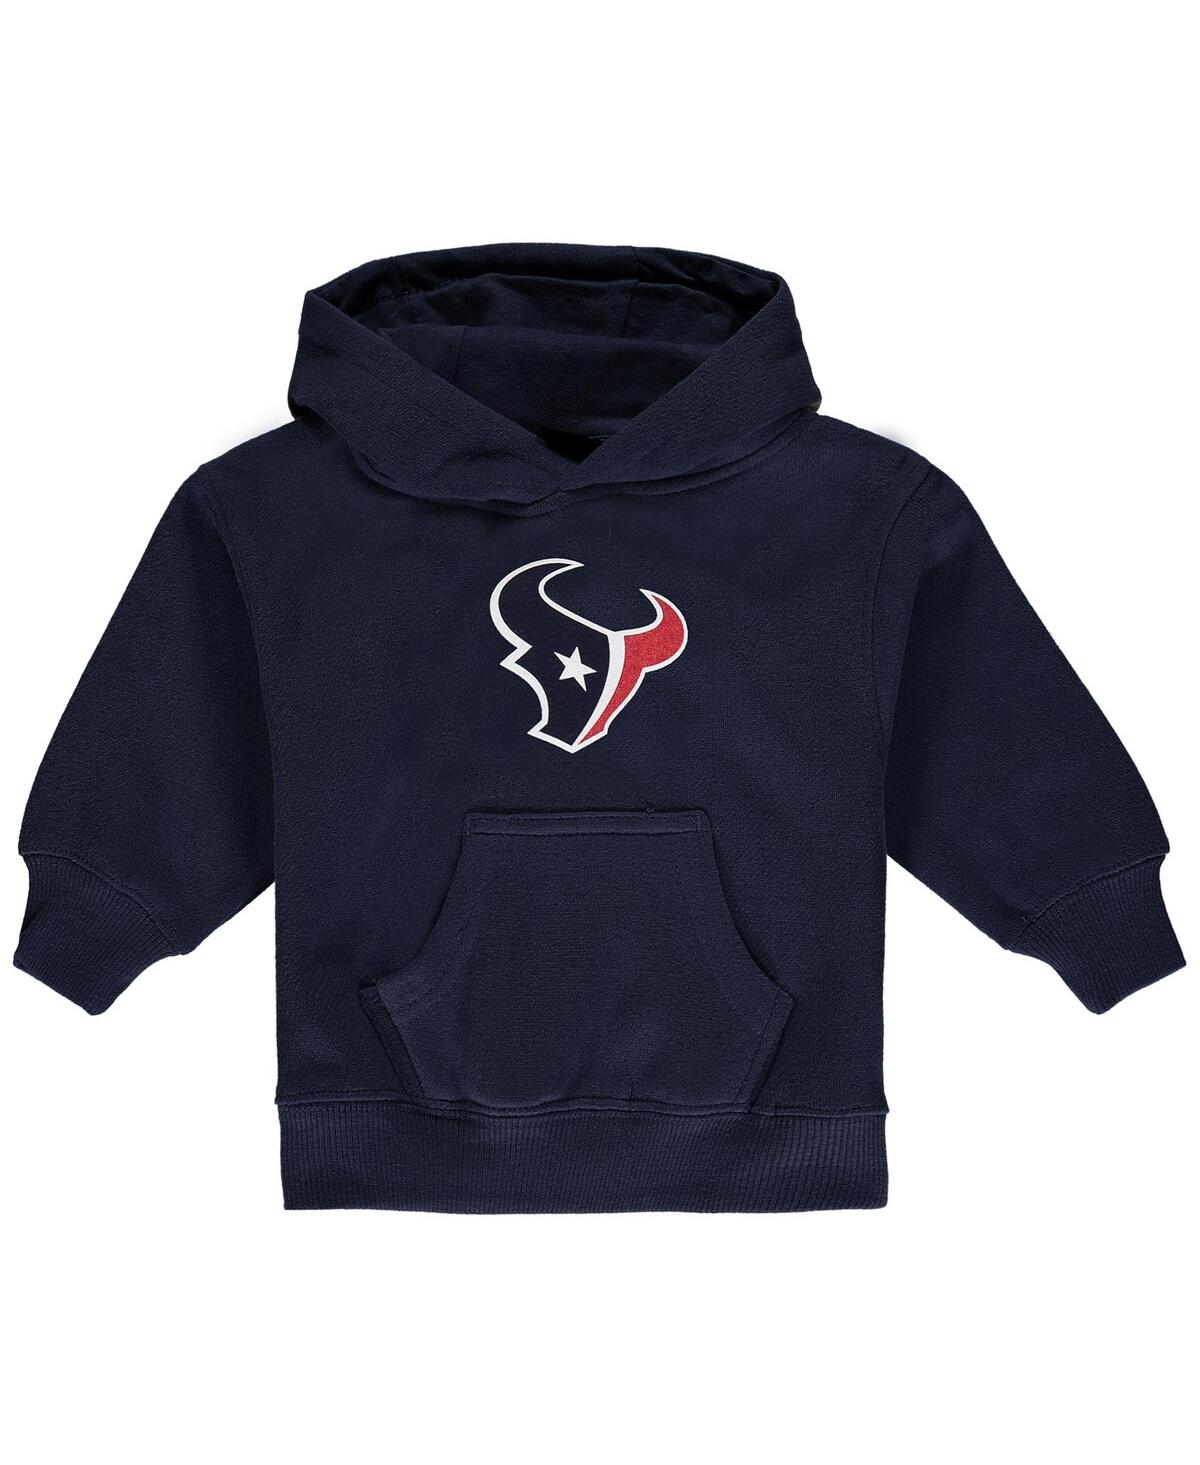 Outerstuff Babies' Toddler Boys And Girls Navy Houston Texans Team Logo Pullover Hoodie